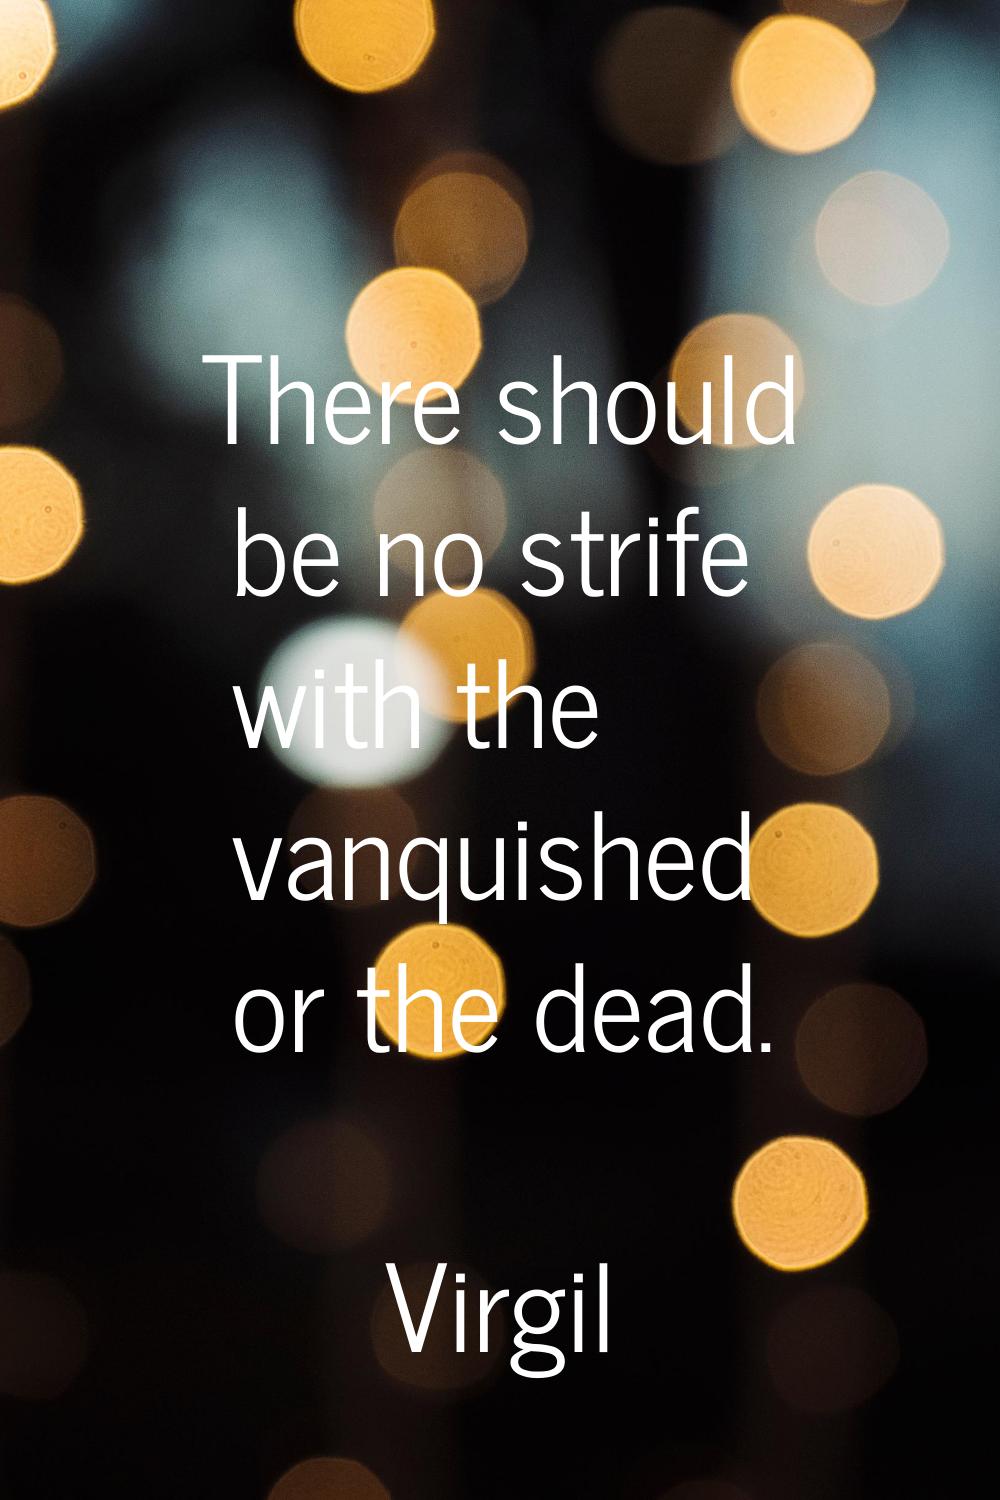 There should be no strife with the vanquished or the dead.